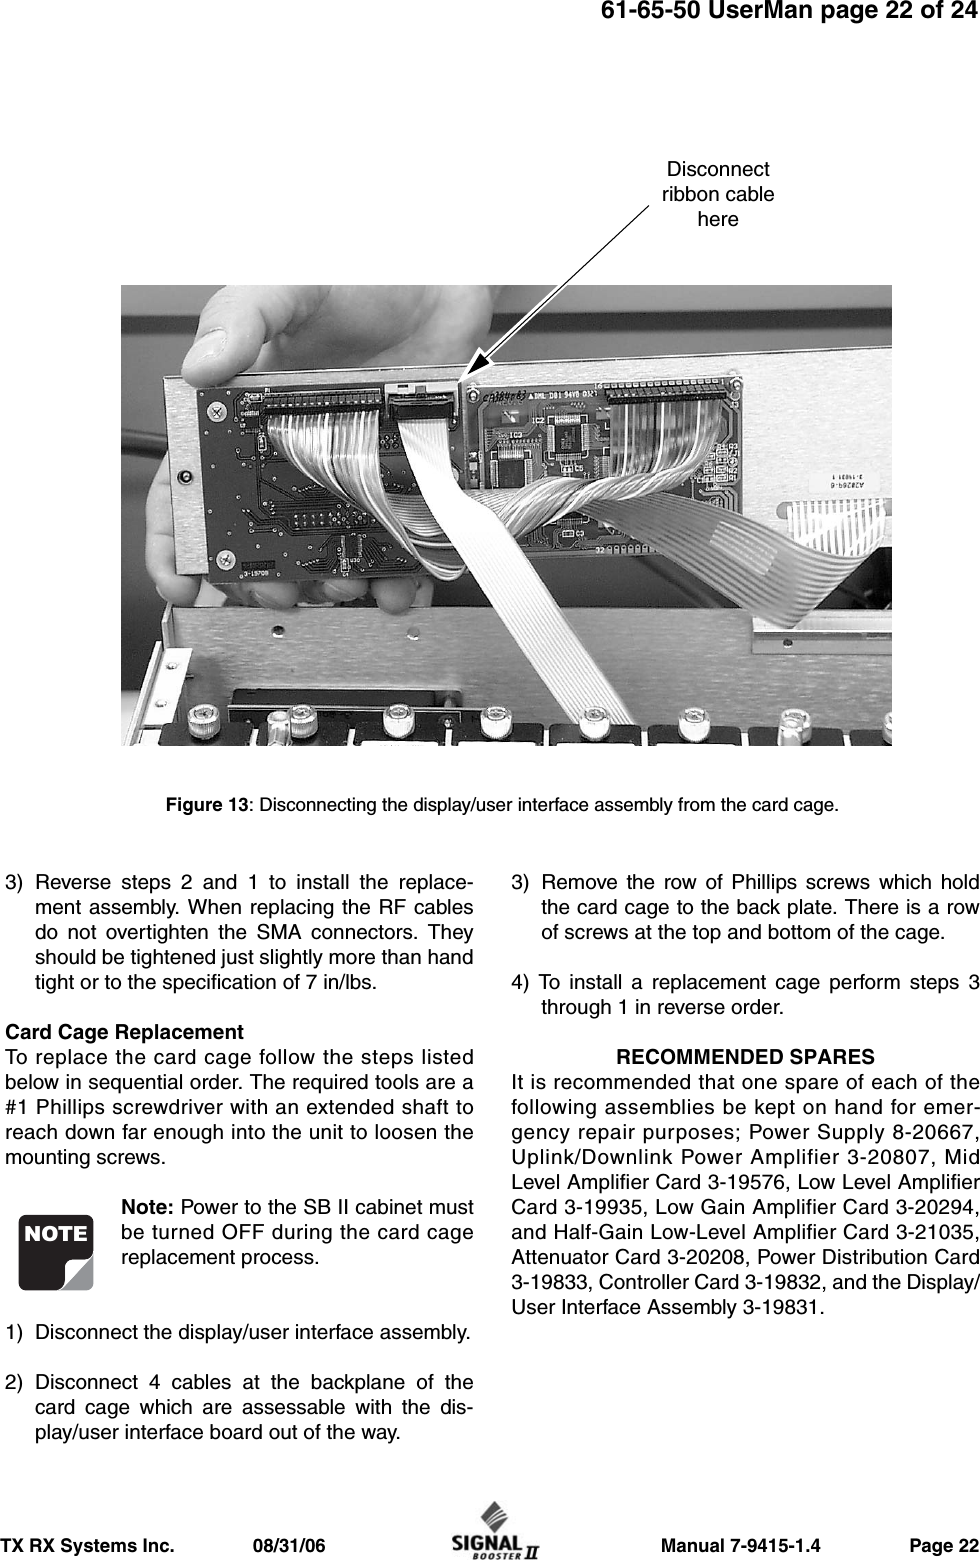                     Manual 7-9415-1.4                 Page 22TX RX Systems Inc.               08/31/0661-65-50 UserMan page 22 of 243) Reverse steps 2 and 1 to install the replace-ment assembly. When replacing the RF cablesdo not overtighten the SMA connectors. Theyshould be tightened just slightly more than handtight or to the specification of 7 in/lbs.Card Cage ReplacementTo replace the card cage follow the steps listedbelow in sequential order. The required tools are a#1 Phillips screwdriver with an extended shaft toreach down far enough into the unit to loosen themounting screws.Note: Power to the SB II cabinet mustbe turned OFF during the card cagereplacement process.1) Disconnect the display/user interface assembly.2) Disconnect 4 cables at the backplane of thecard cage which are assessable with the dis-play/user interface board out of the way.3) Remove the row of Phillips screws which holdthe card cage to the back plate. There is a rowof screws at the top and bottom of the cage.4) To install a replacement cage perform steps 3through 1 in reverse order.RECOMMENDED SPARESIt is recommended that one spare of each of thefollowing assemblies be kept on hand for emer-gency repair purposes; Power Supply 8-20667,Uplink/Downlink Power Amplifier 3-20807, MidLevel Amplifier Card 3-19576, Low Level AmplifierCard 3-19935, Low Gain Amplifier Card 3-20294,and Half-Gain Low-Level Amplifier Card 3-21035,Attenuator Card 3-20208, Power Distribution Card3-19833, Controller Card 3-19832, and the Display/User Interface Assembly 3-19831.NOTEFigure 13: Disconnecting the display/user interface assembly from the card cage.Disconnectribbon cablehere